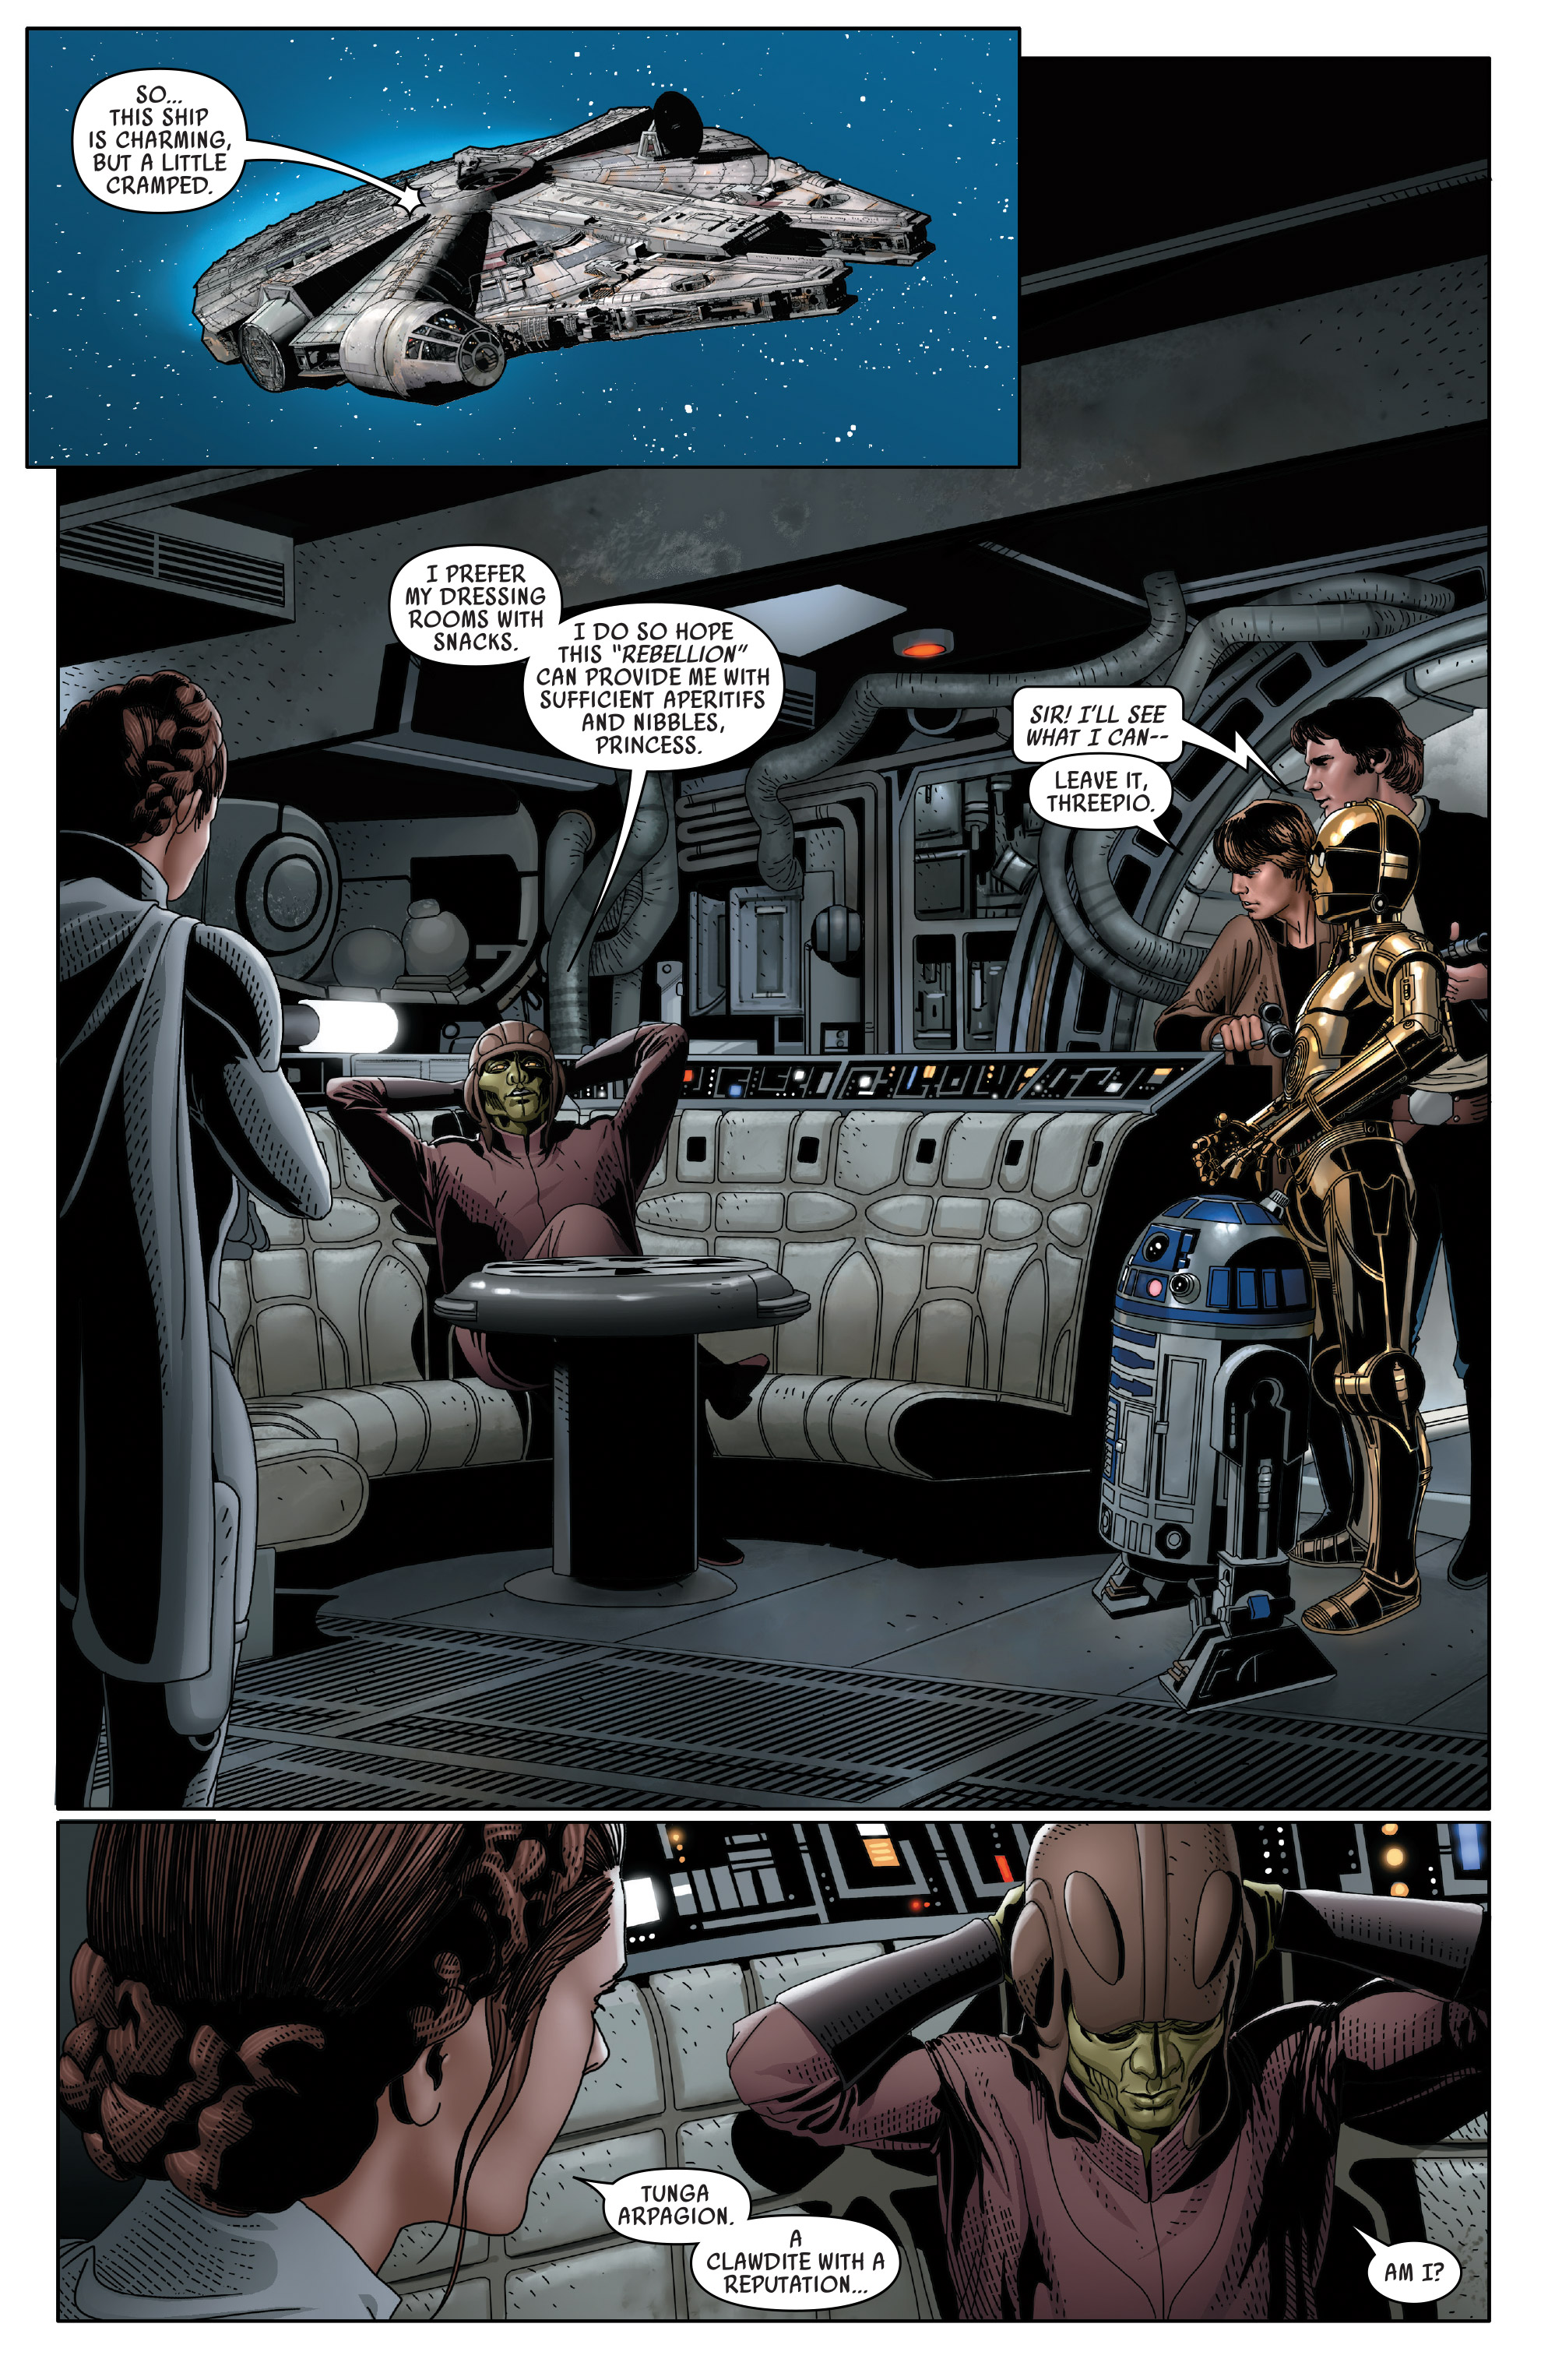 Star Wars (2015-): Chapter 46 - Page 3